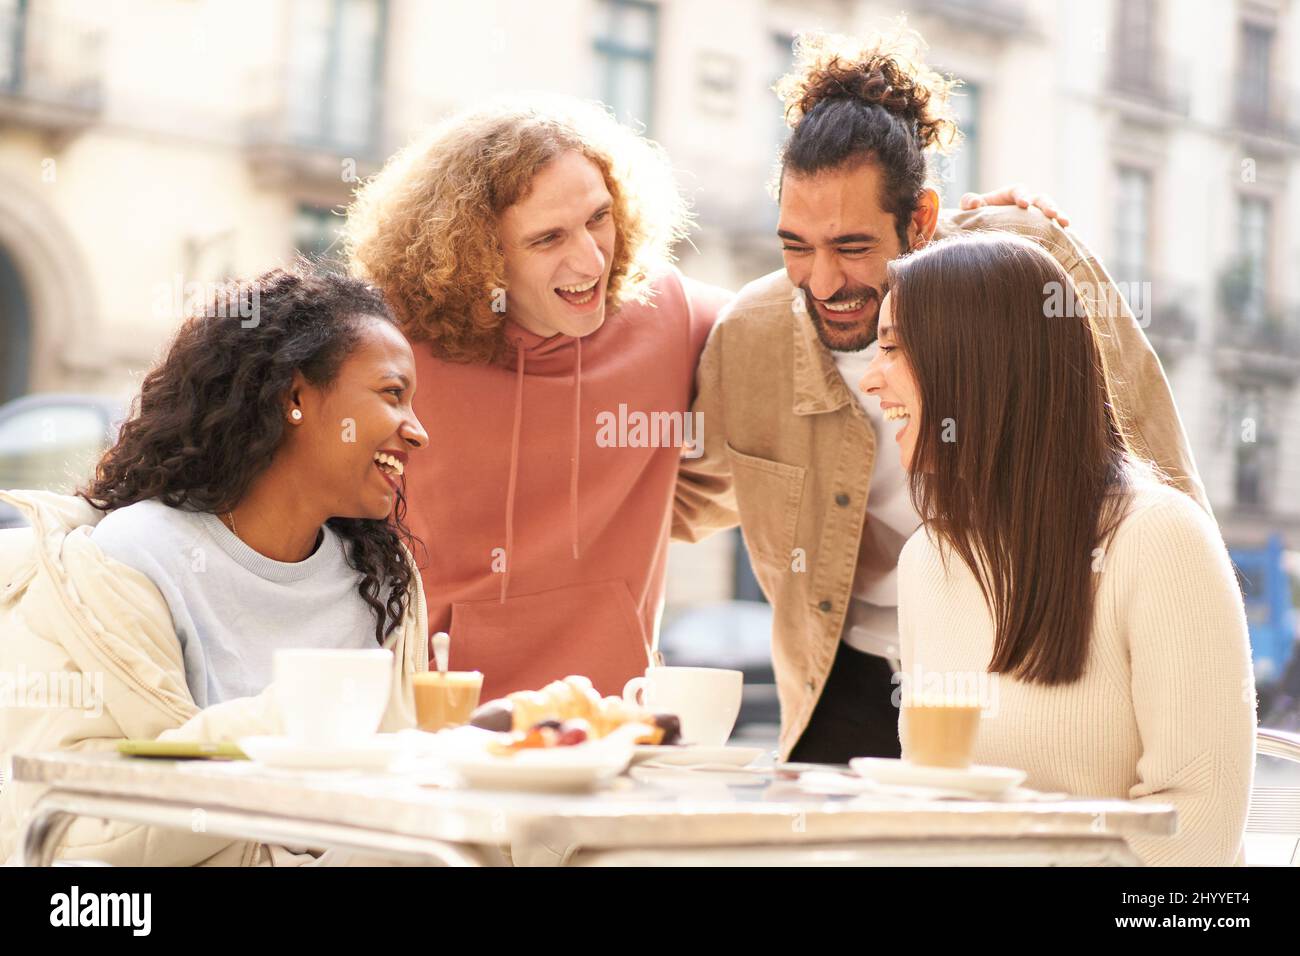 Two female friends having breakfast on the terrace of the bar while 2 guys come over to flirt. Stock Photo